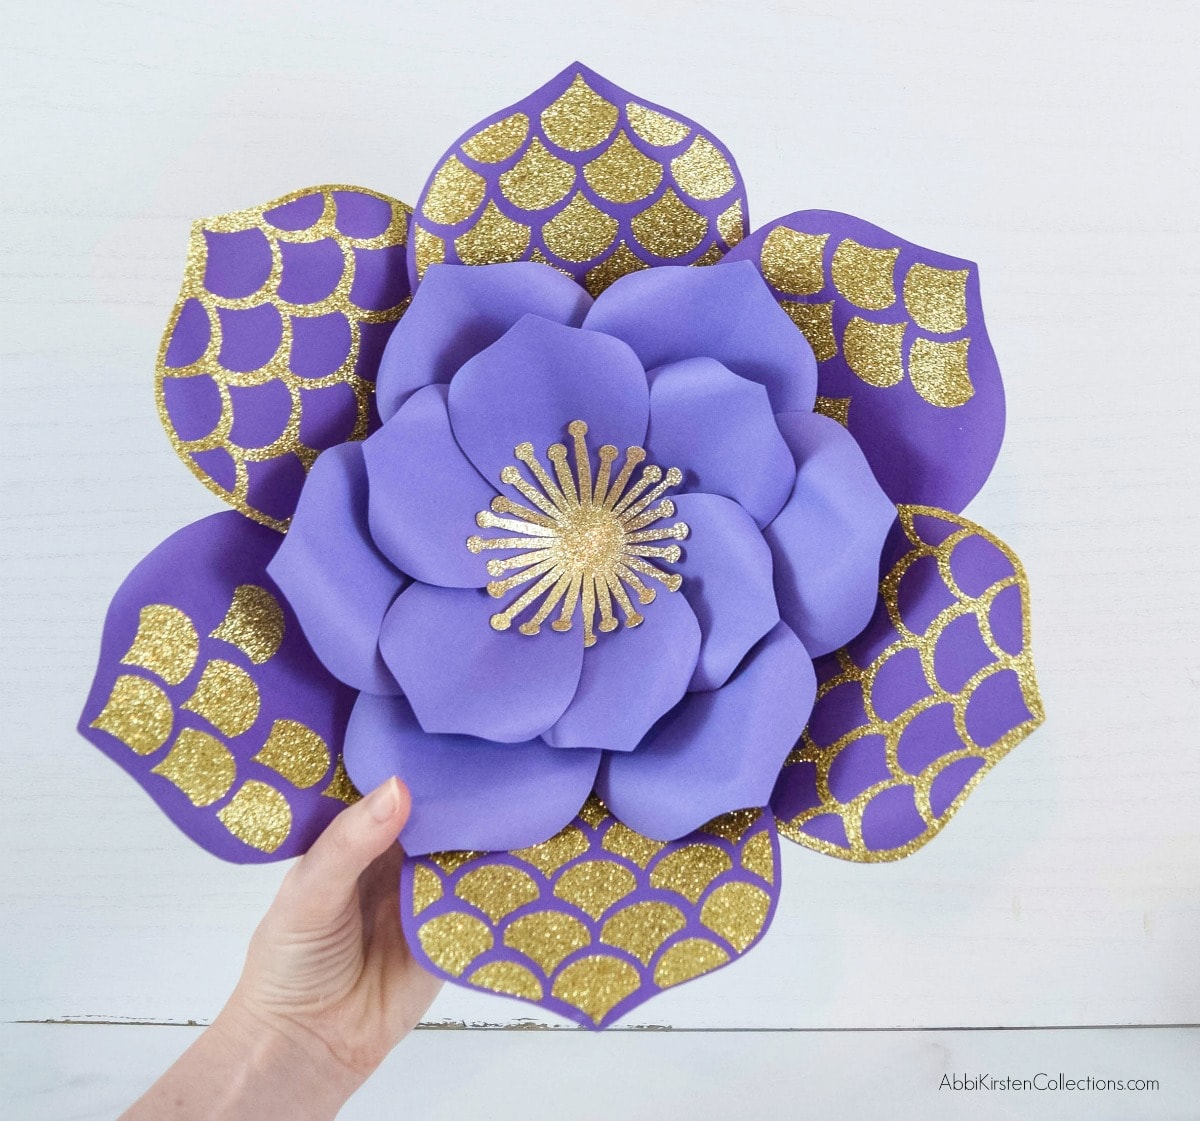 How to Add Patterns and Shape Cut-Outs to Your Paper Flower Templates in Cricut Design Space